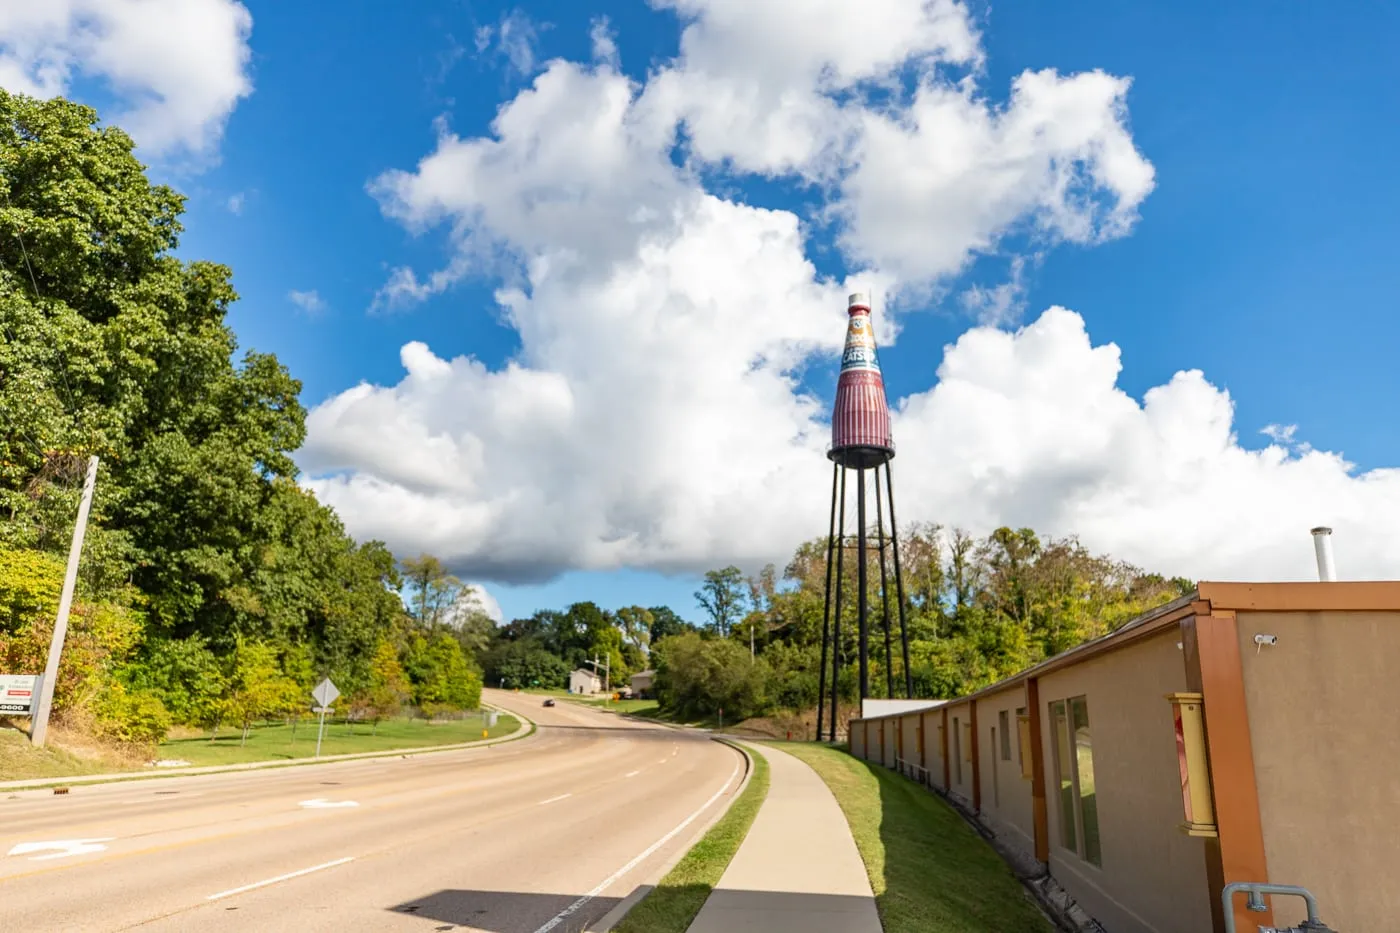 World's Largest Catsup Bottle in Collinsville, Illinois